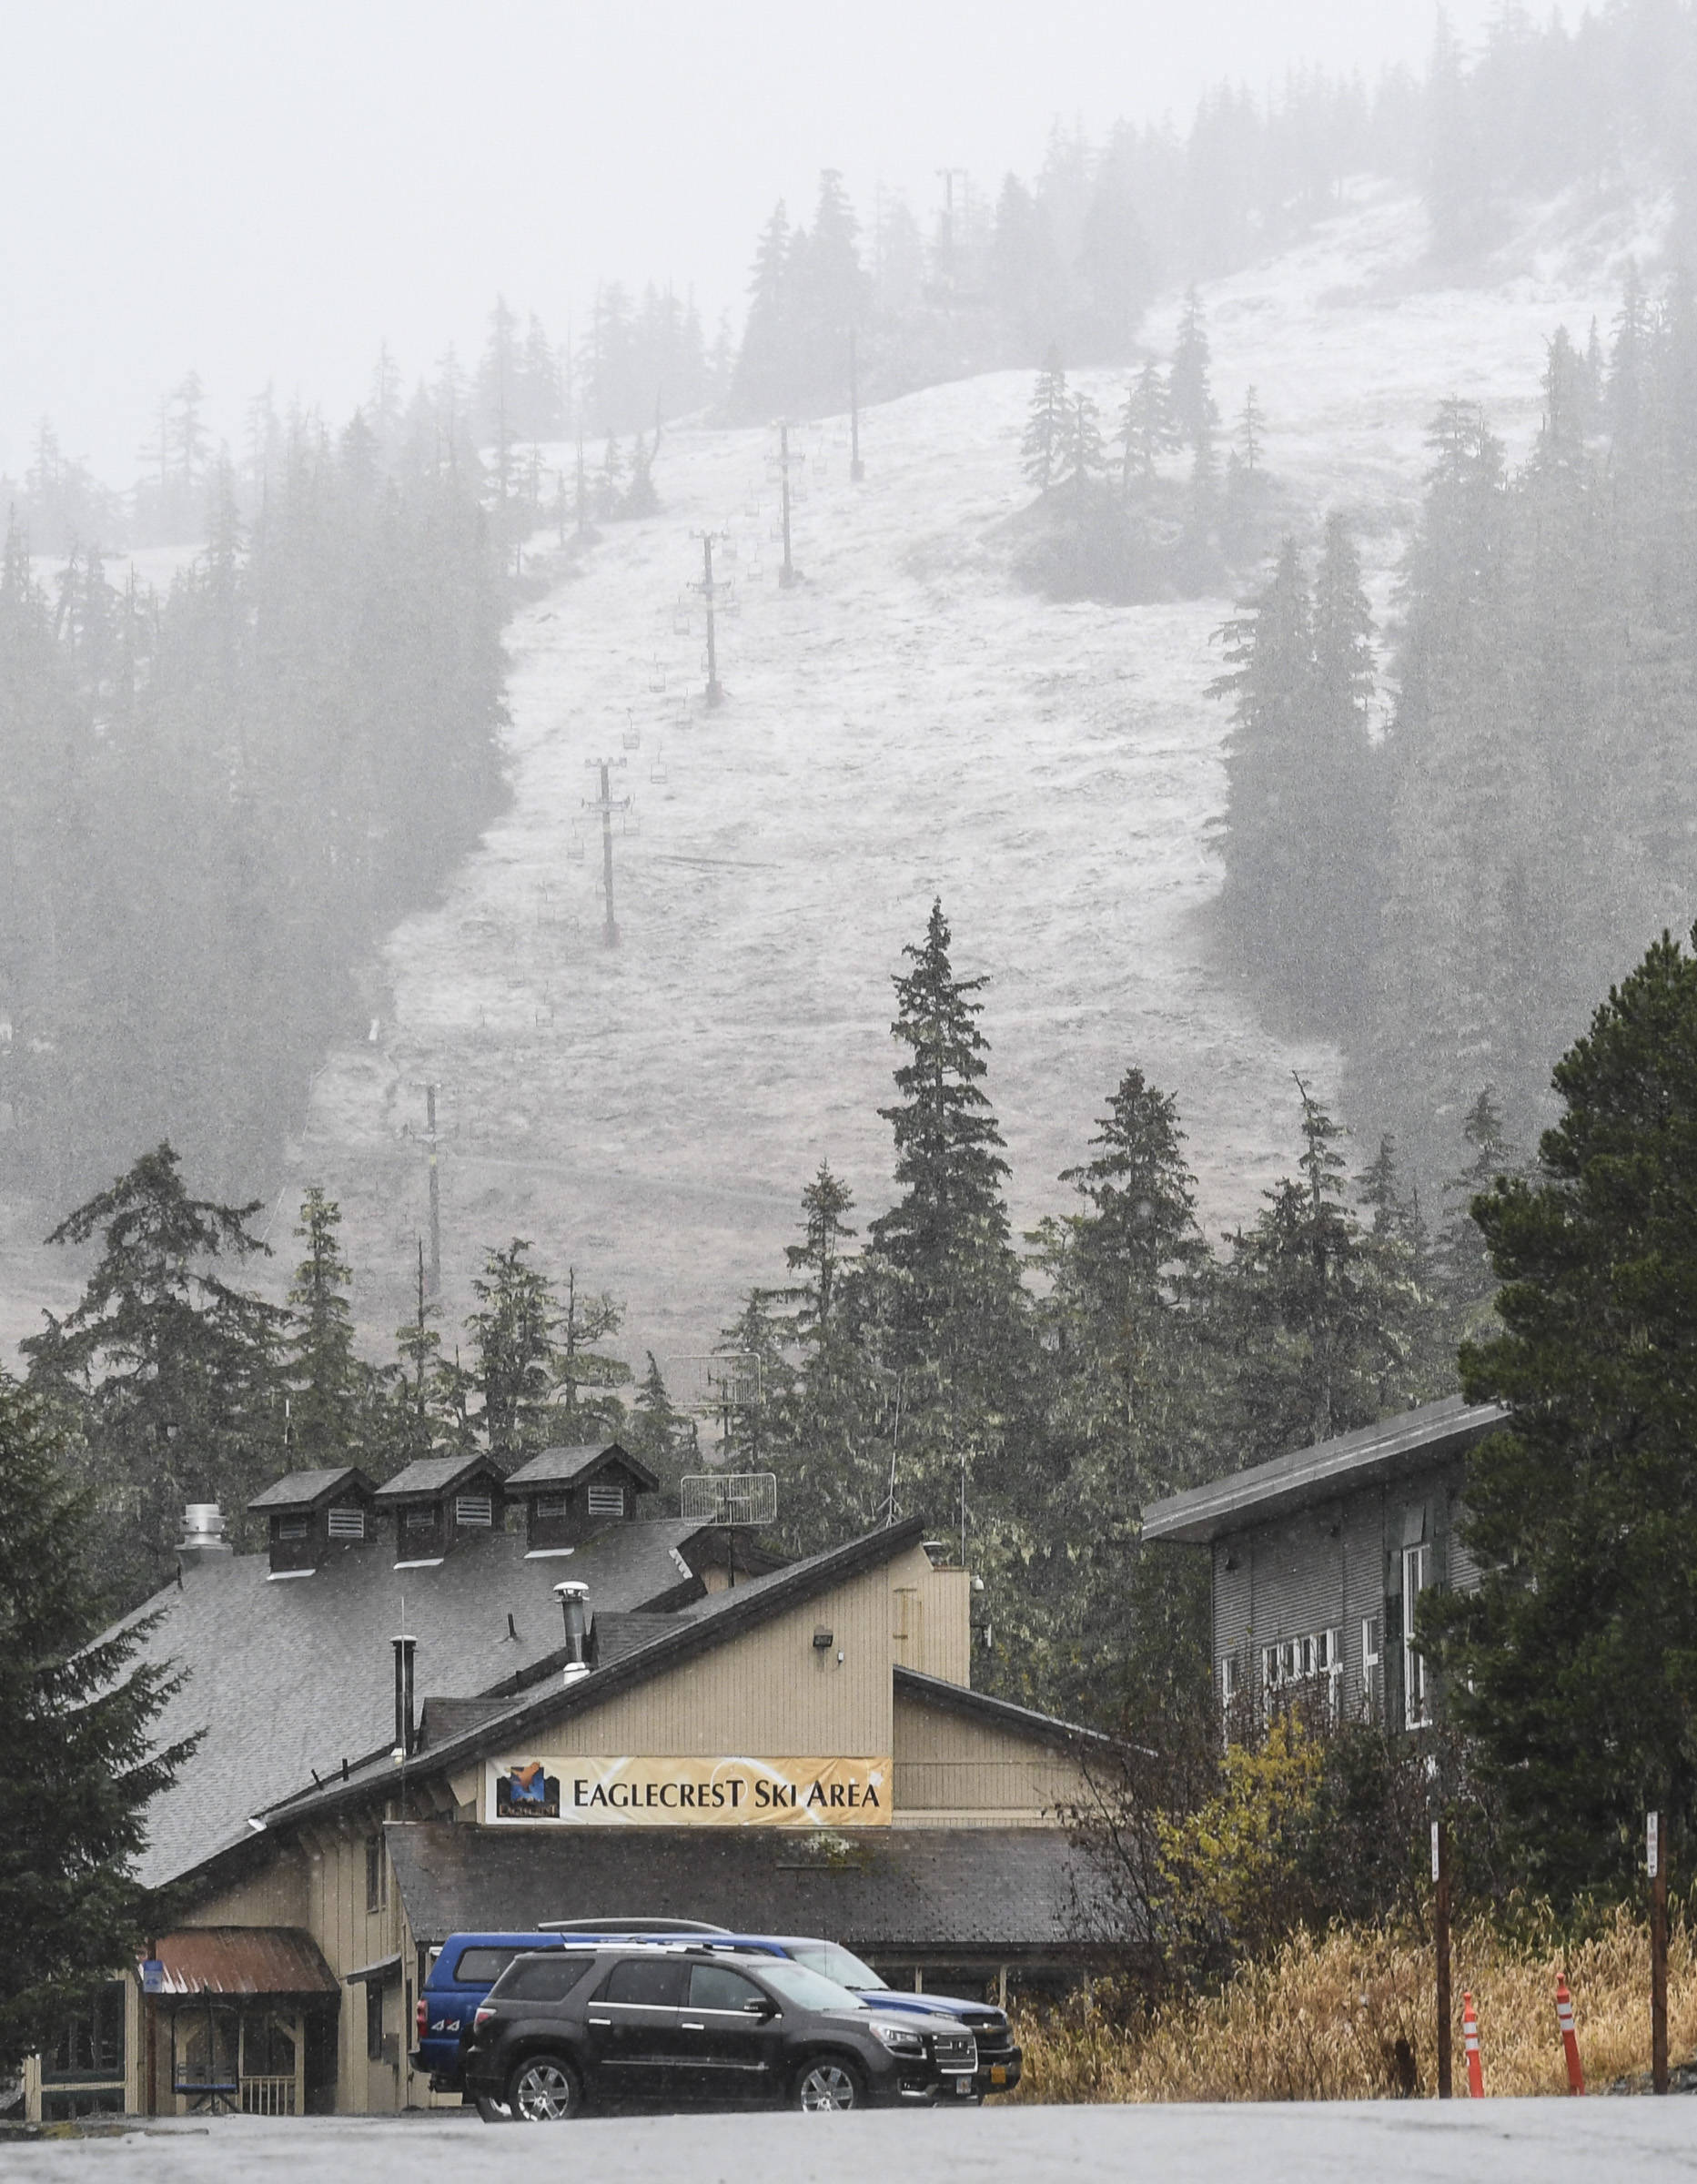 Fresh snow hits the lower slopes at the Eaglecrest Ski Area on Tuesday, Oct. 29, 2019. (Michael Penn | Juneau Empire)